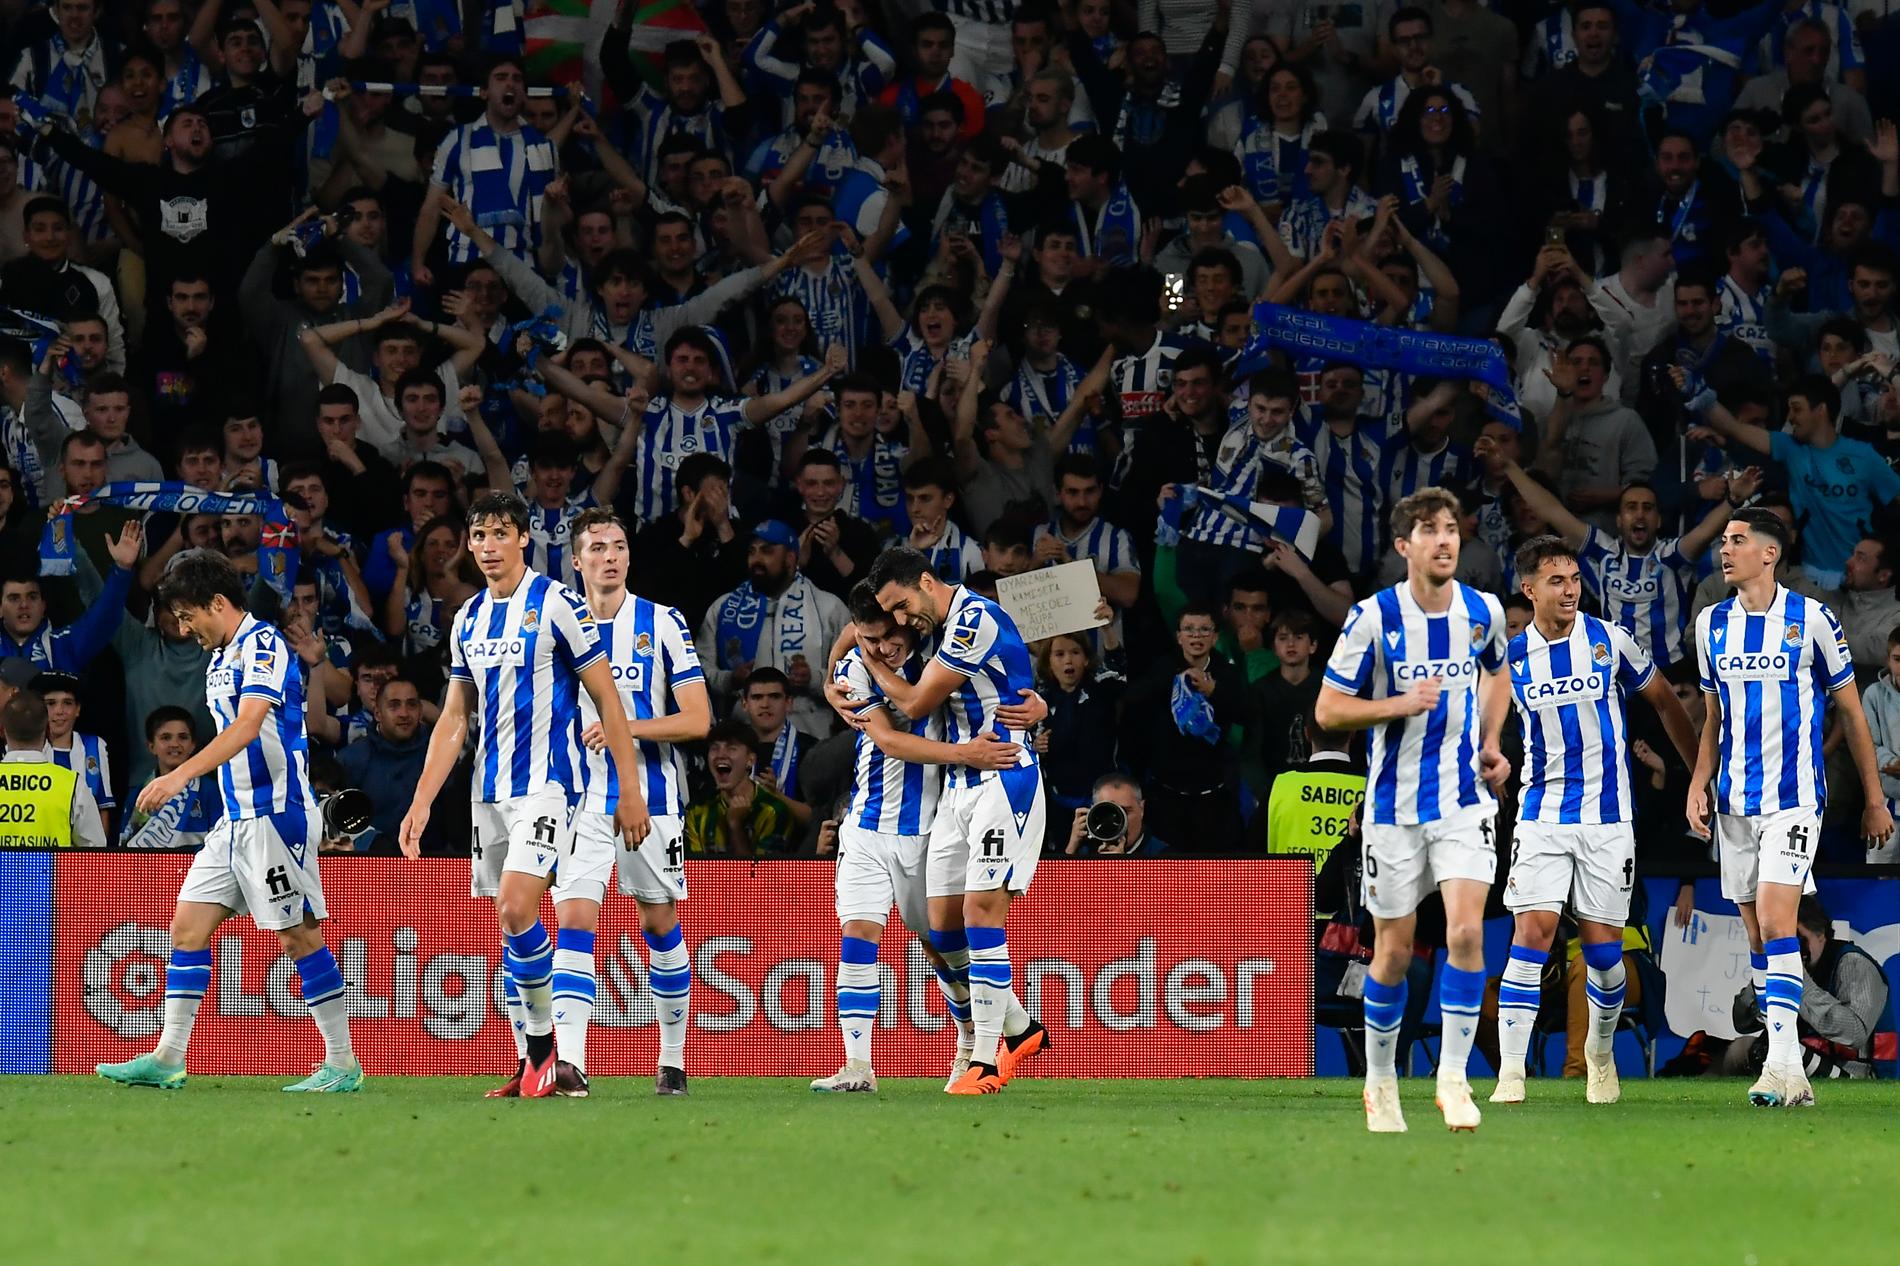 Sorloth was involved in the scoring as Real Sociedad beat Real Madrid